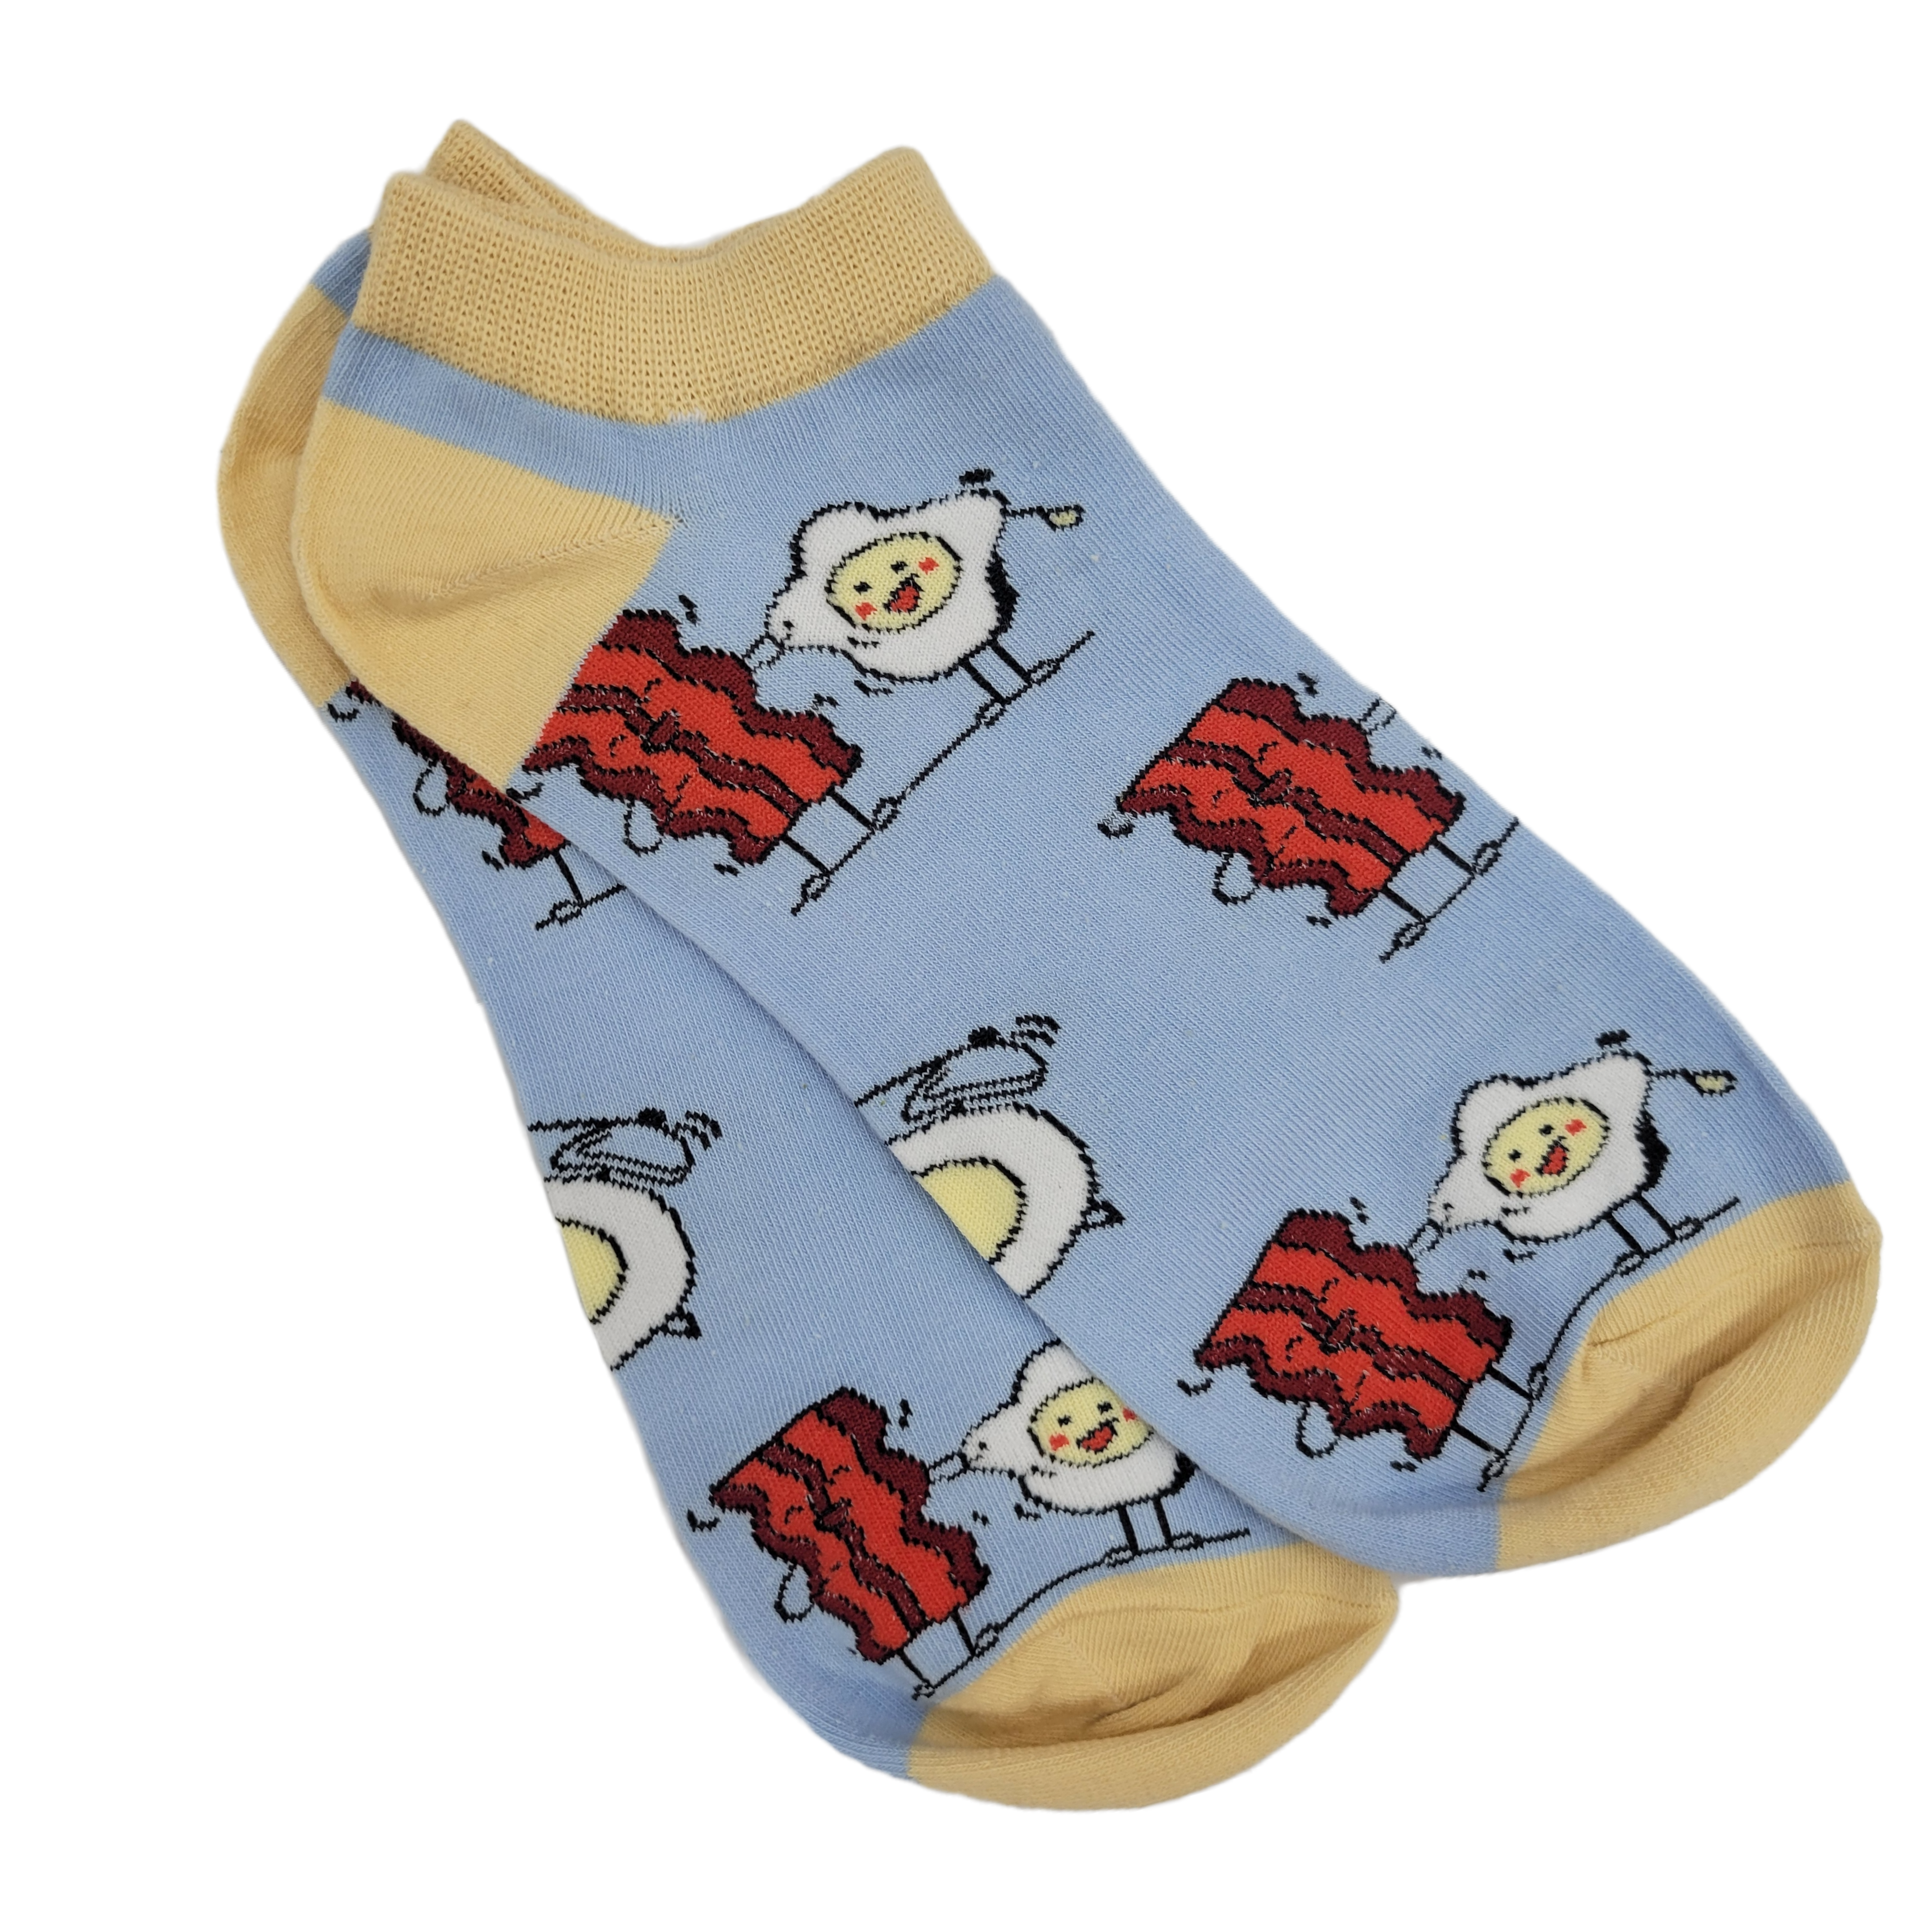 Bacon and Eggs Ankle Socks (Adult Large)